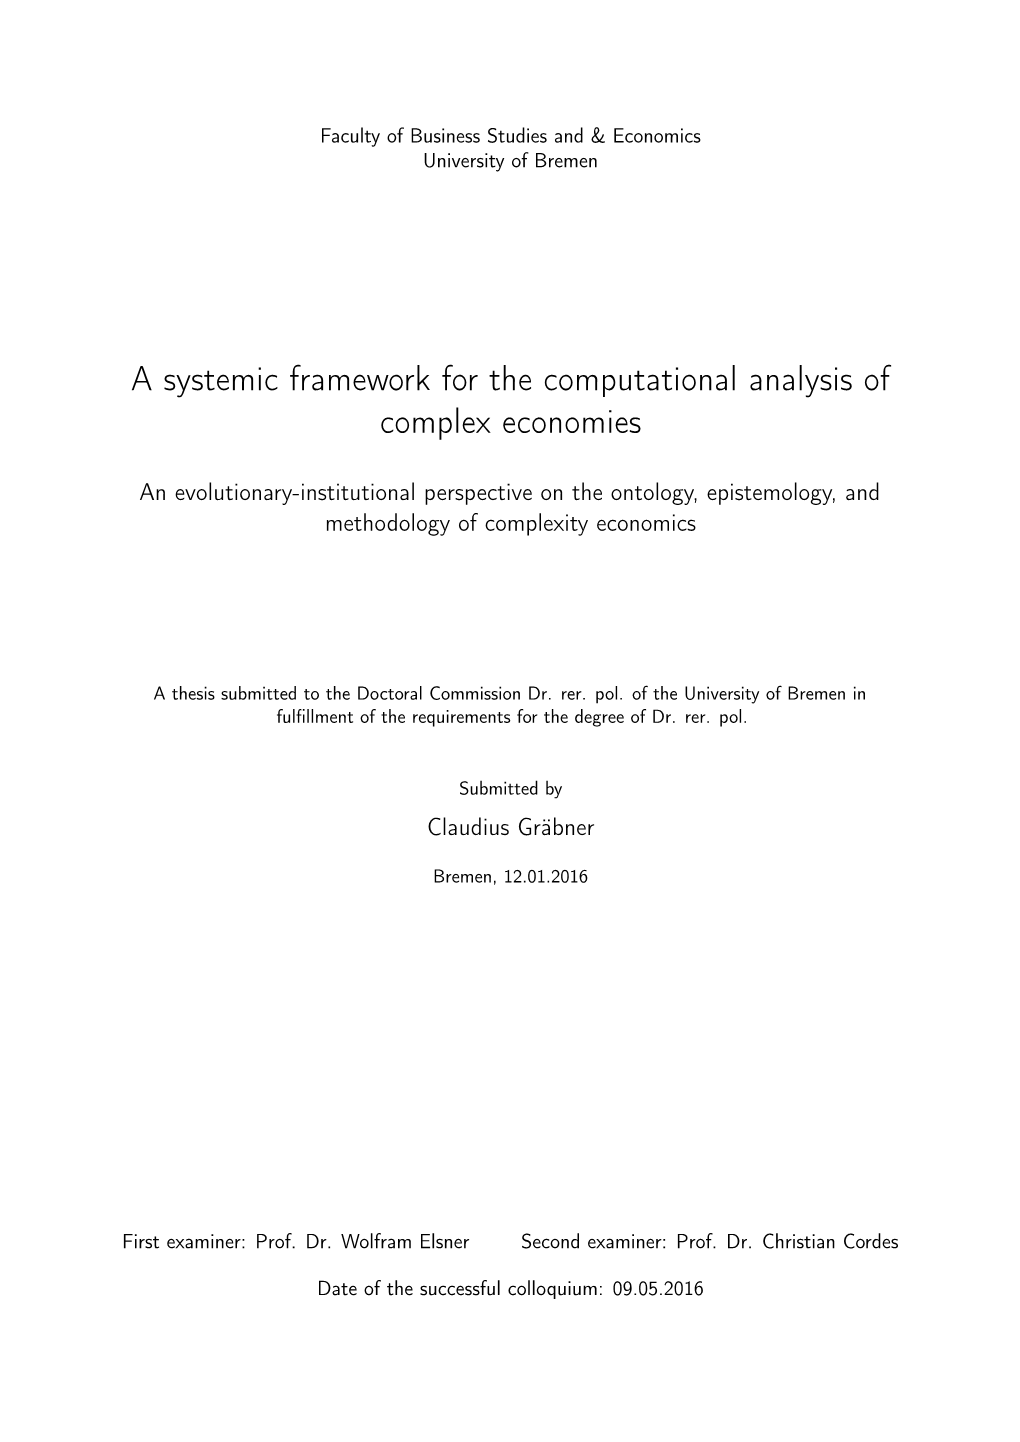 A Systemic Framework for the Computational Analysis of Complex Economies